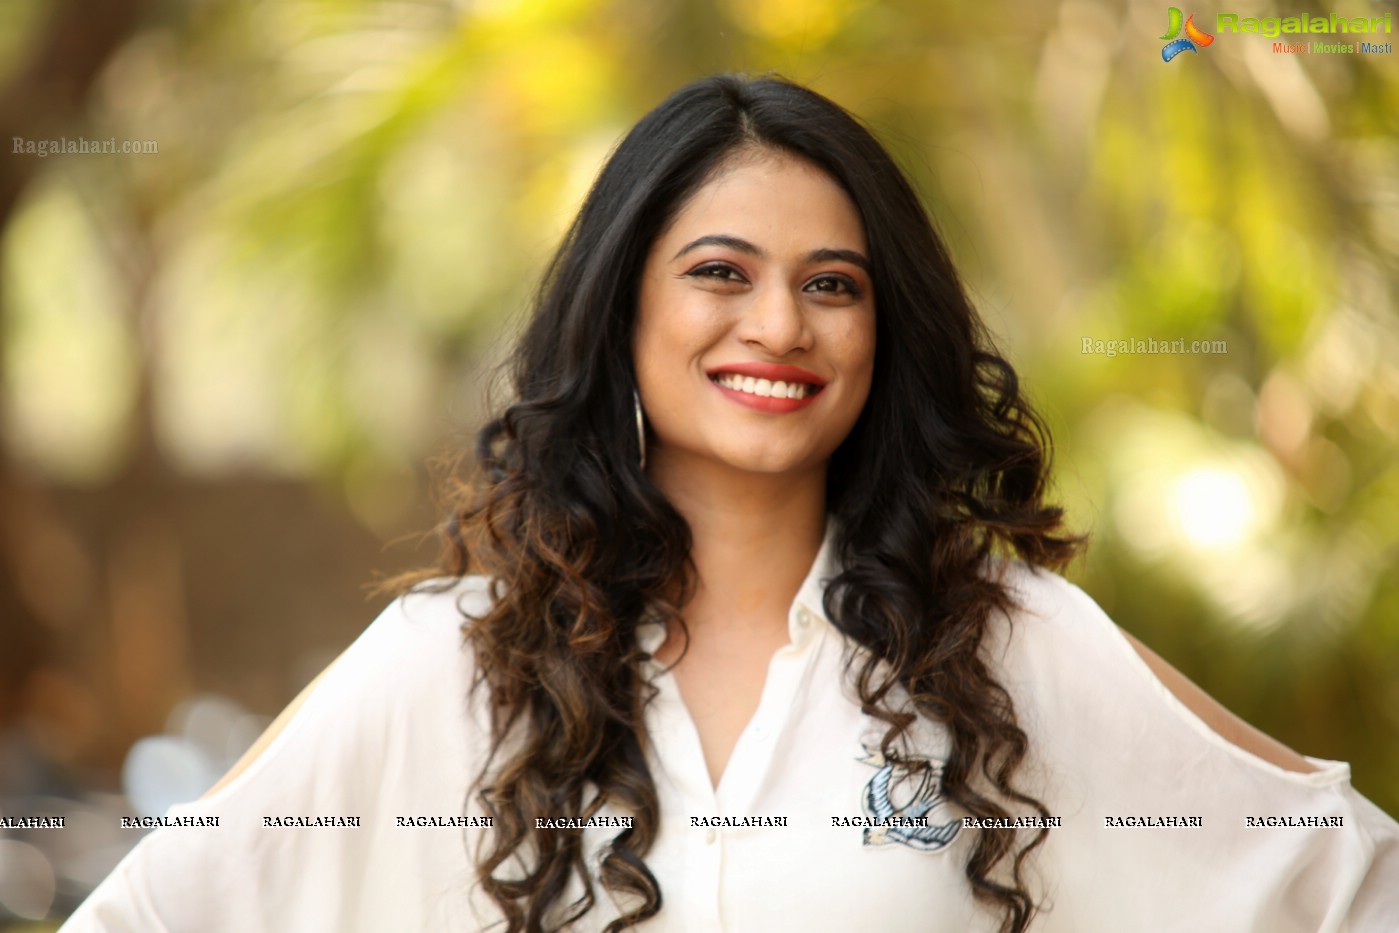 Zara Shah at Aithe 2.0 Pre-Release Event (Posters)